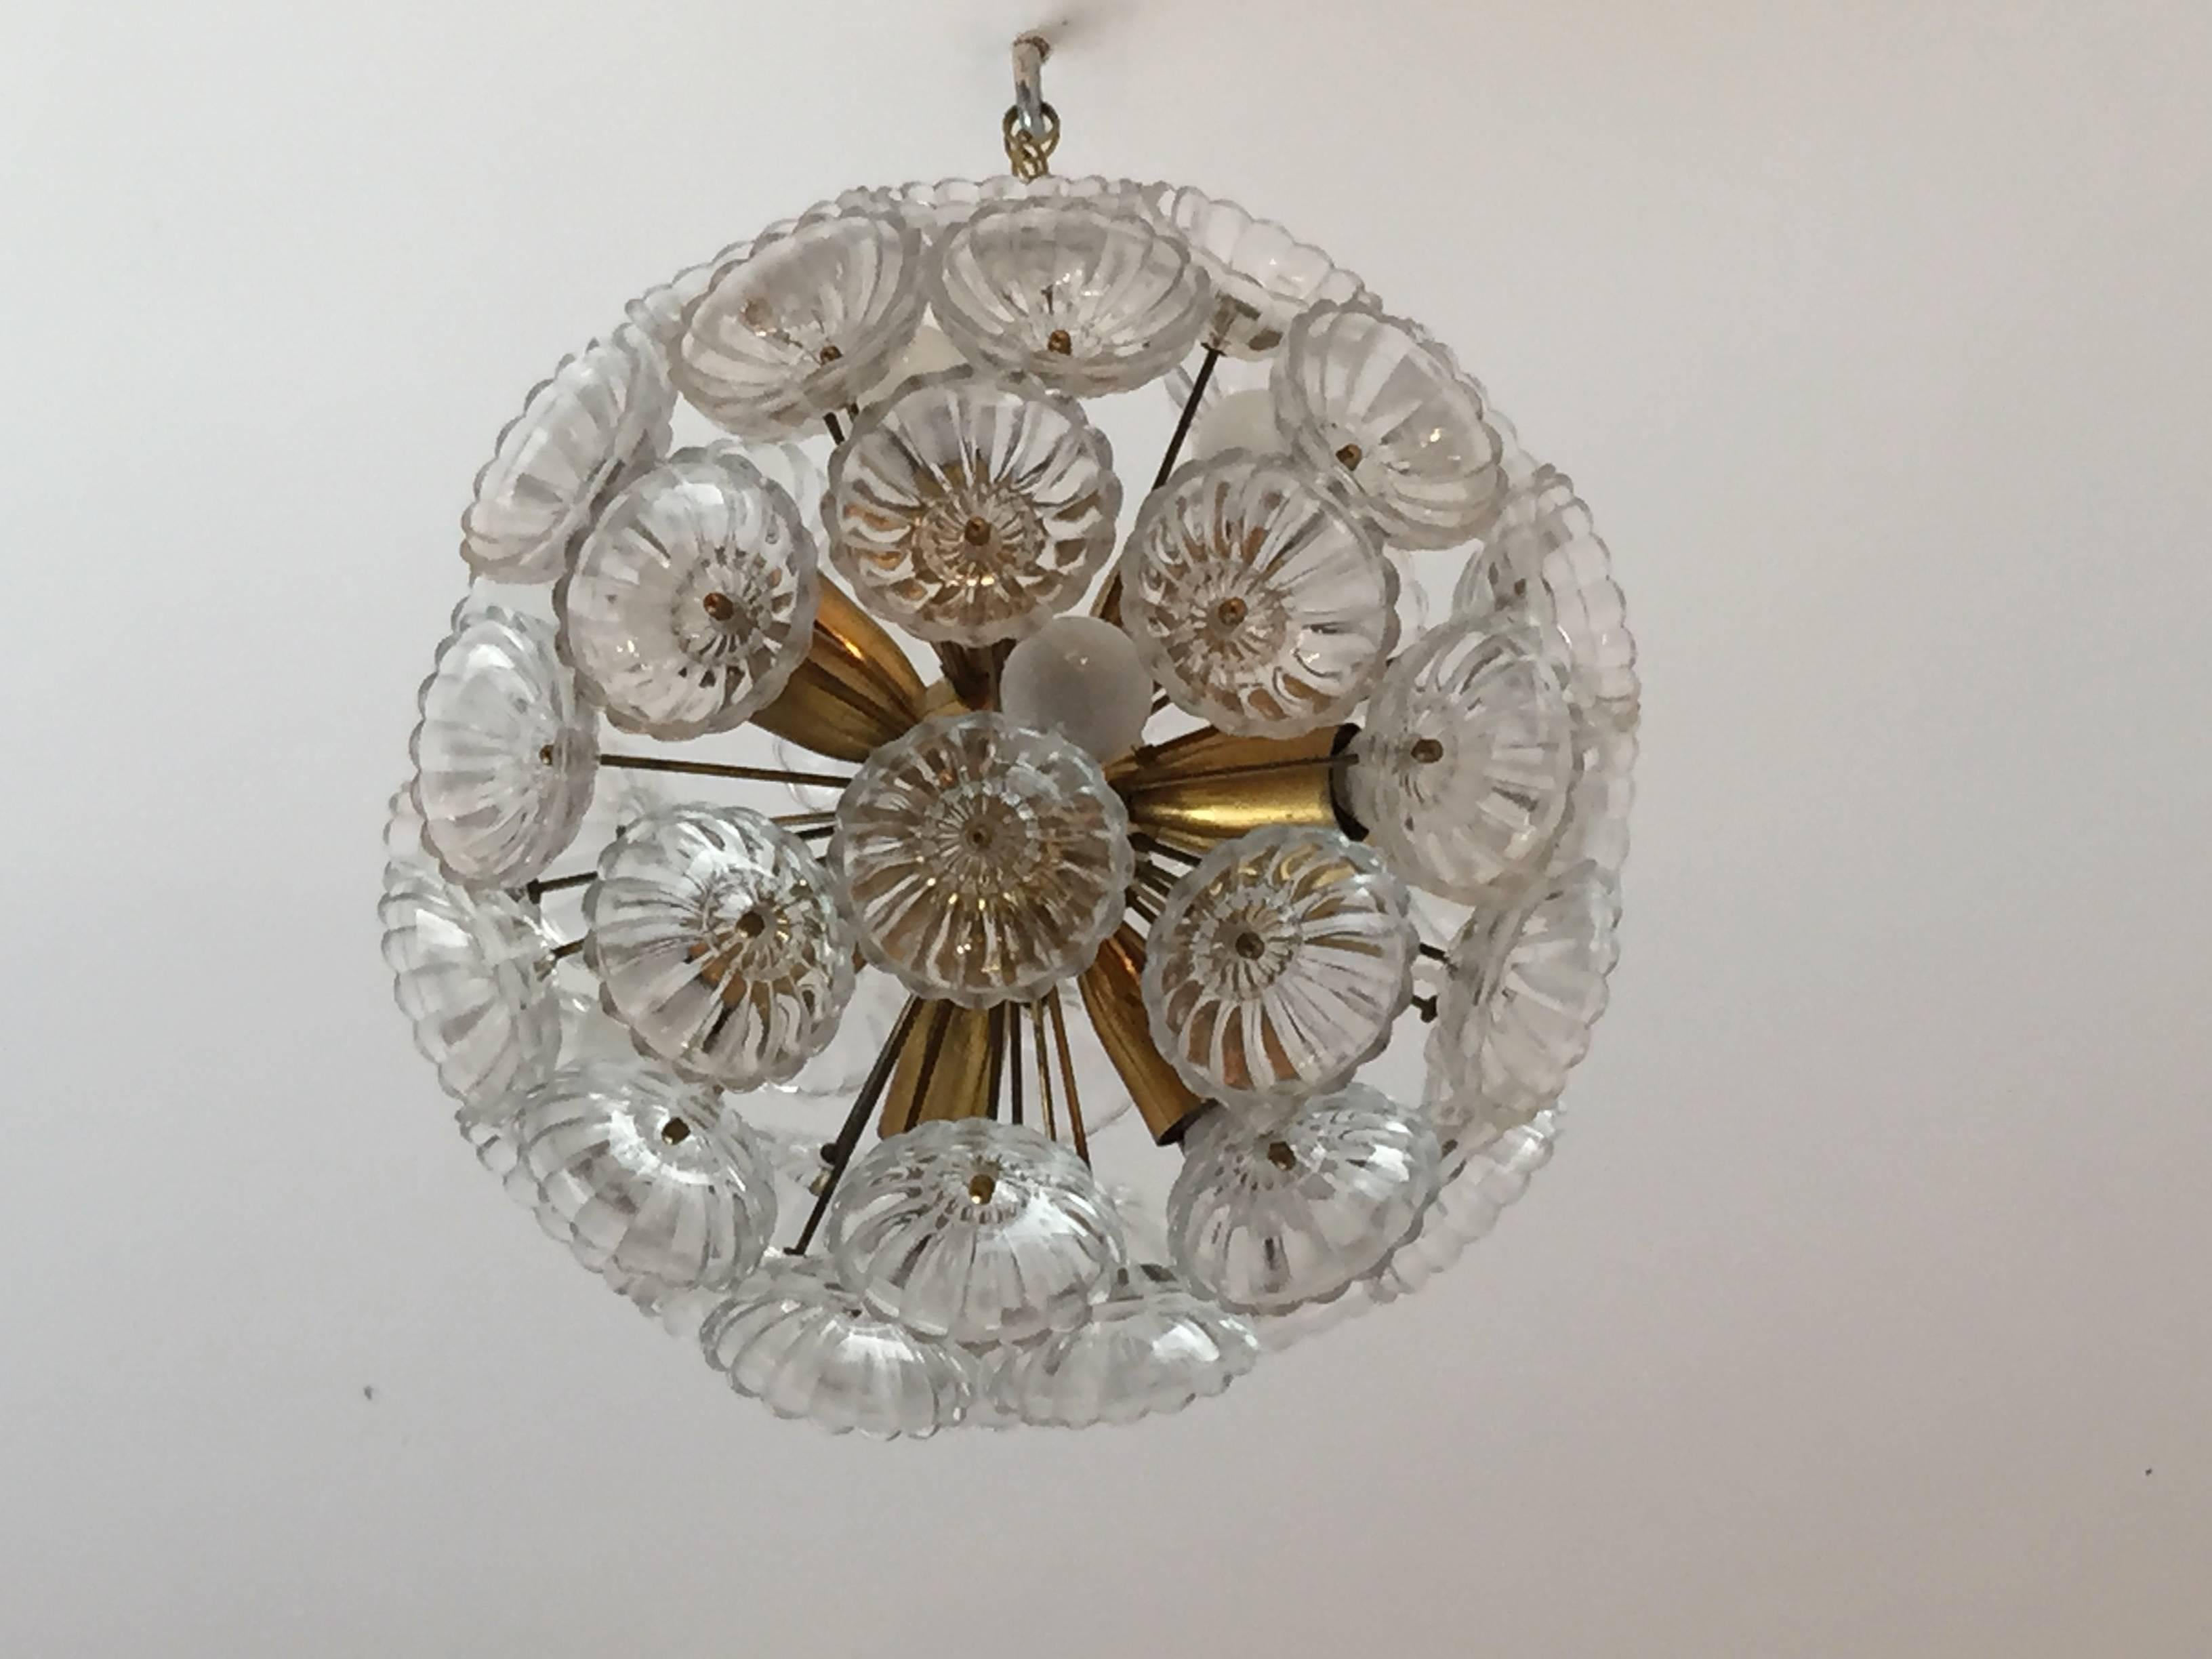 A wonderful 1950s Austrian golden brass chandelier with floral glass cup elements. Rewired. Ten light sources. We can drop it on a longer chain or pole.